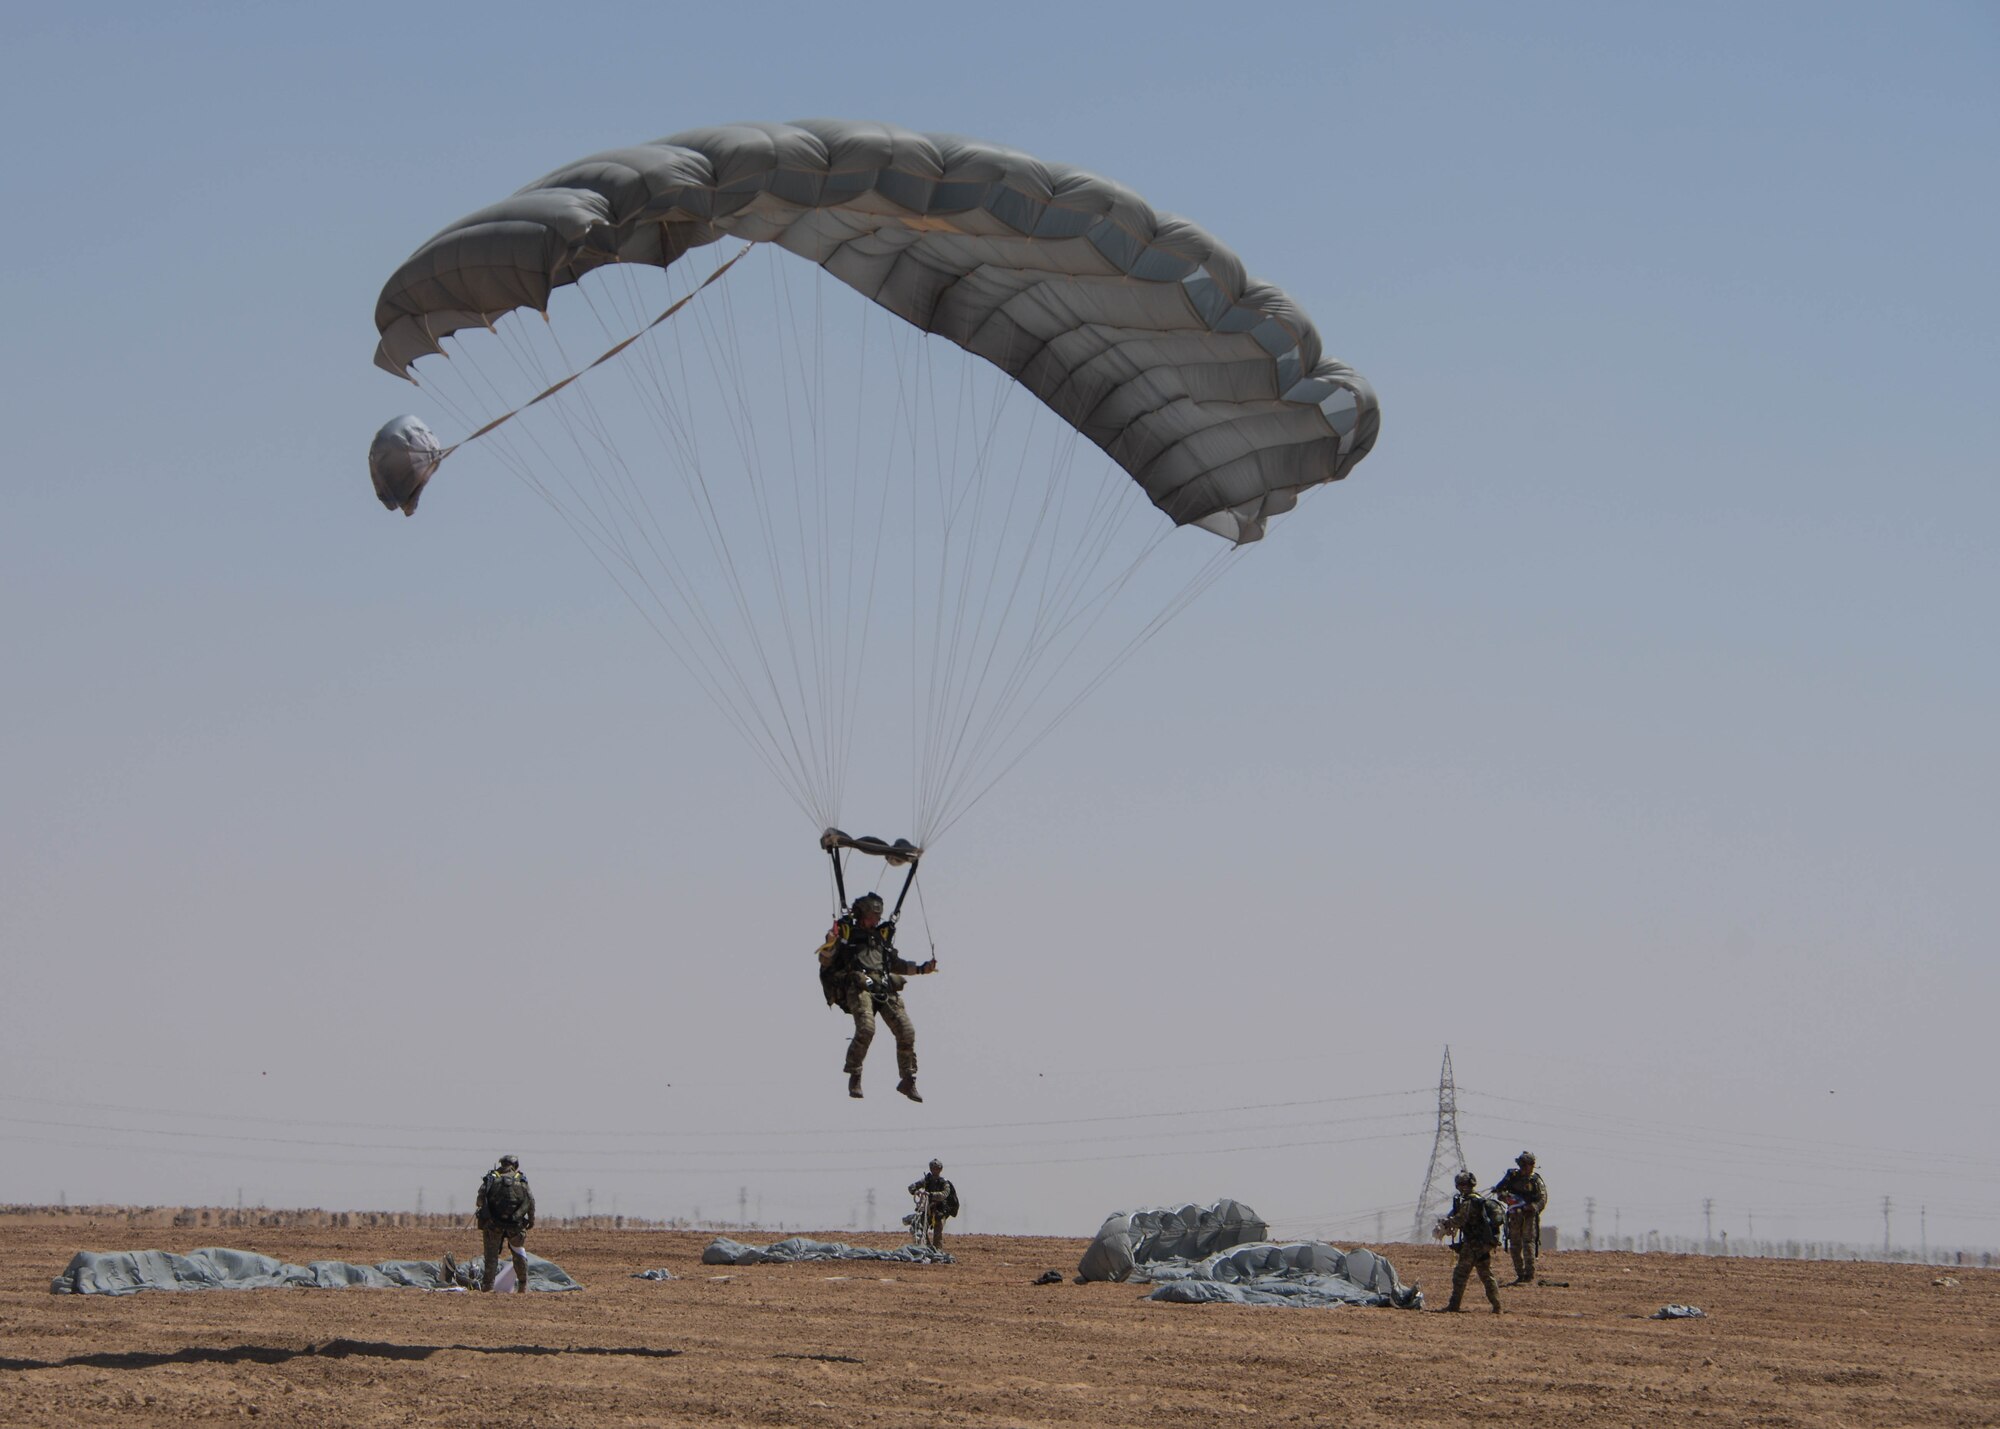 A participant in the Friendship Jump during Exercise Eager Lion parachutes to the ground while other jumpers collect their parachutes in Jordan on Sept. 5, 2019.